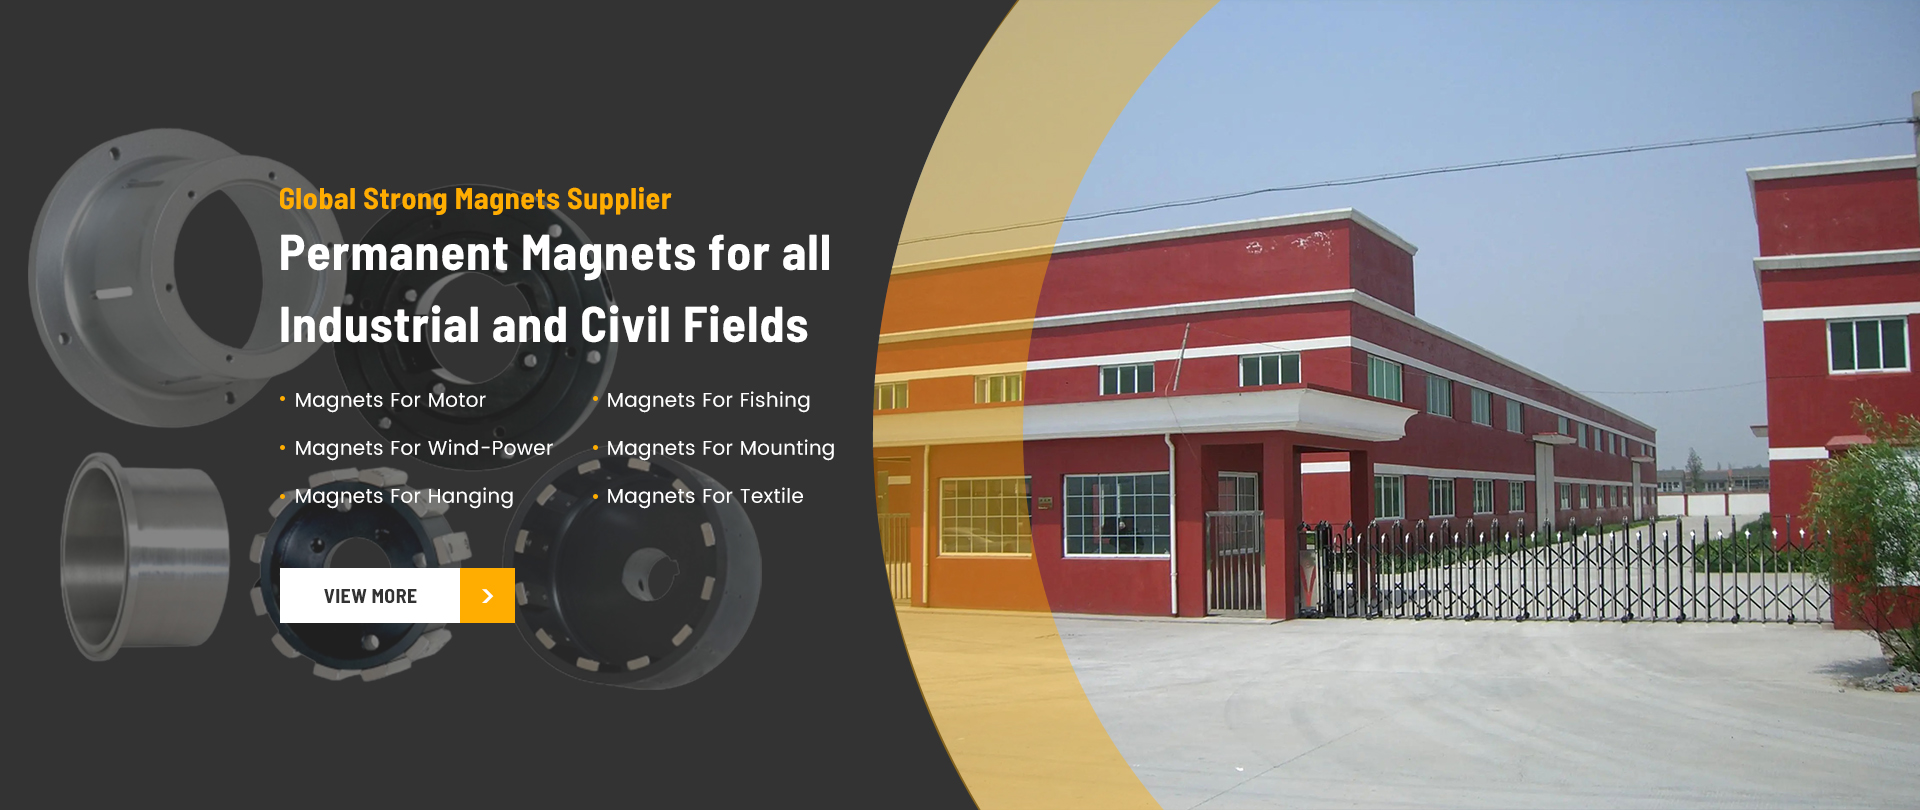 Permanent Magnets for all Industrial and Civil Fields